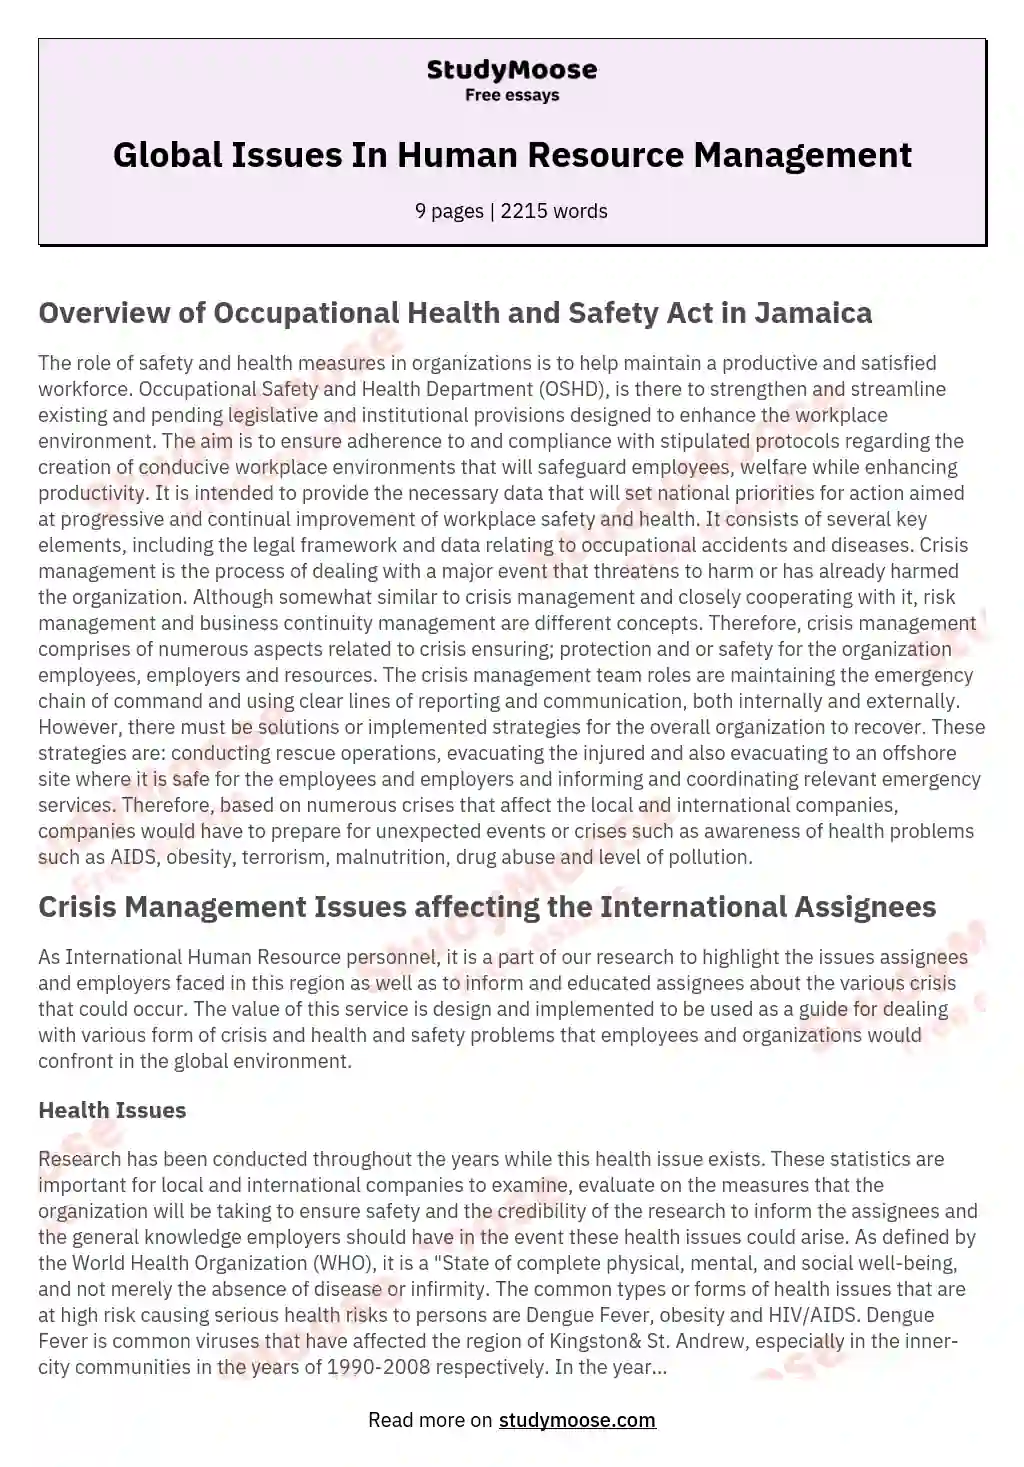 Global Issues In Human Resource Management essay